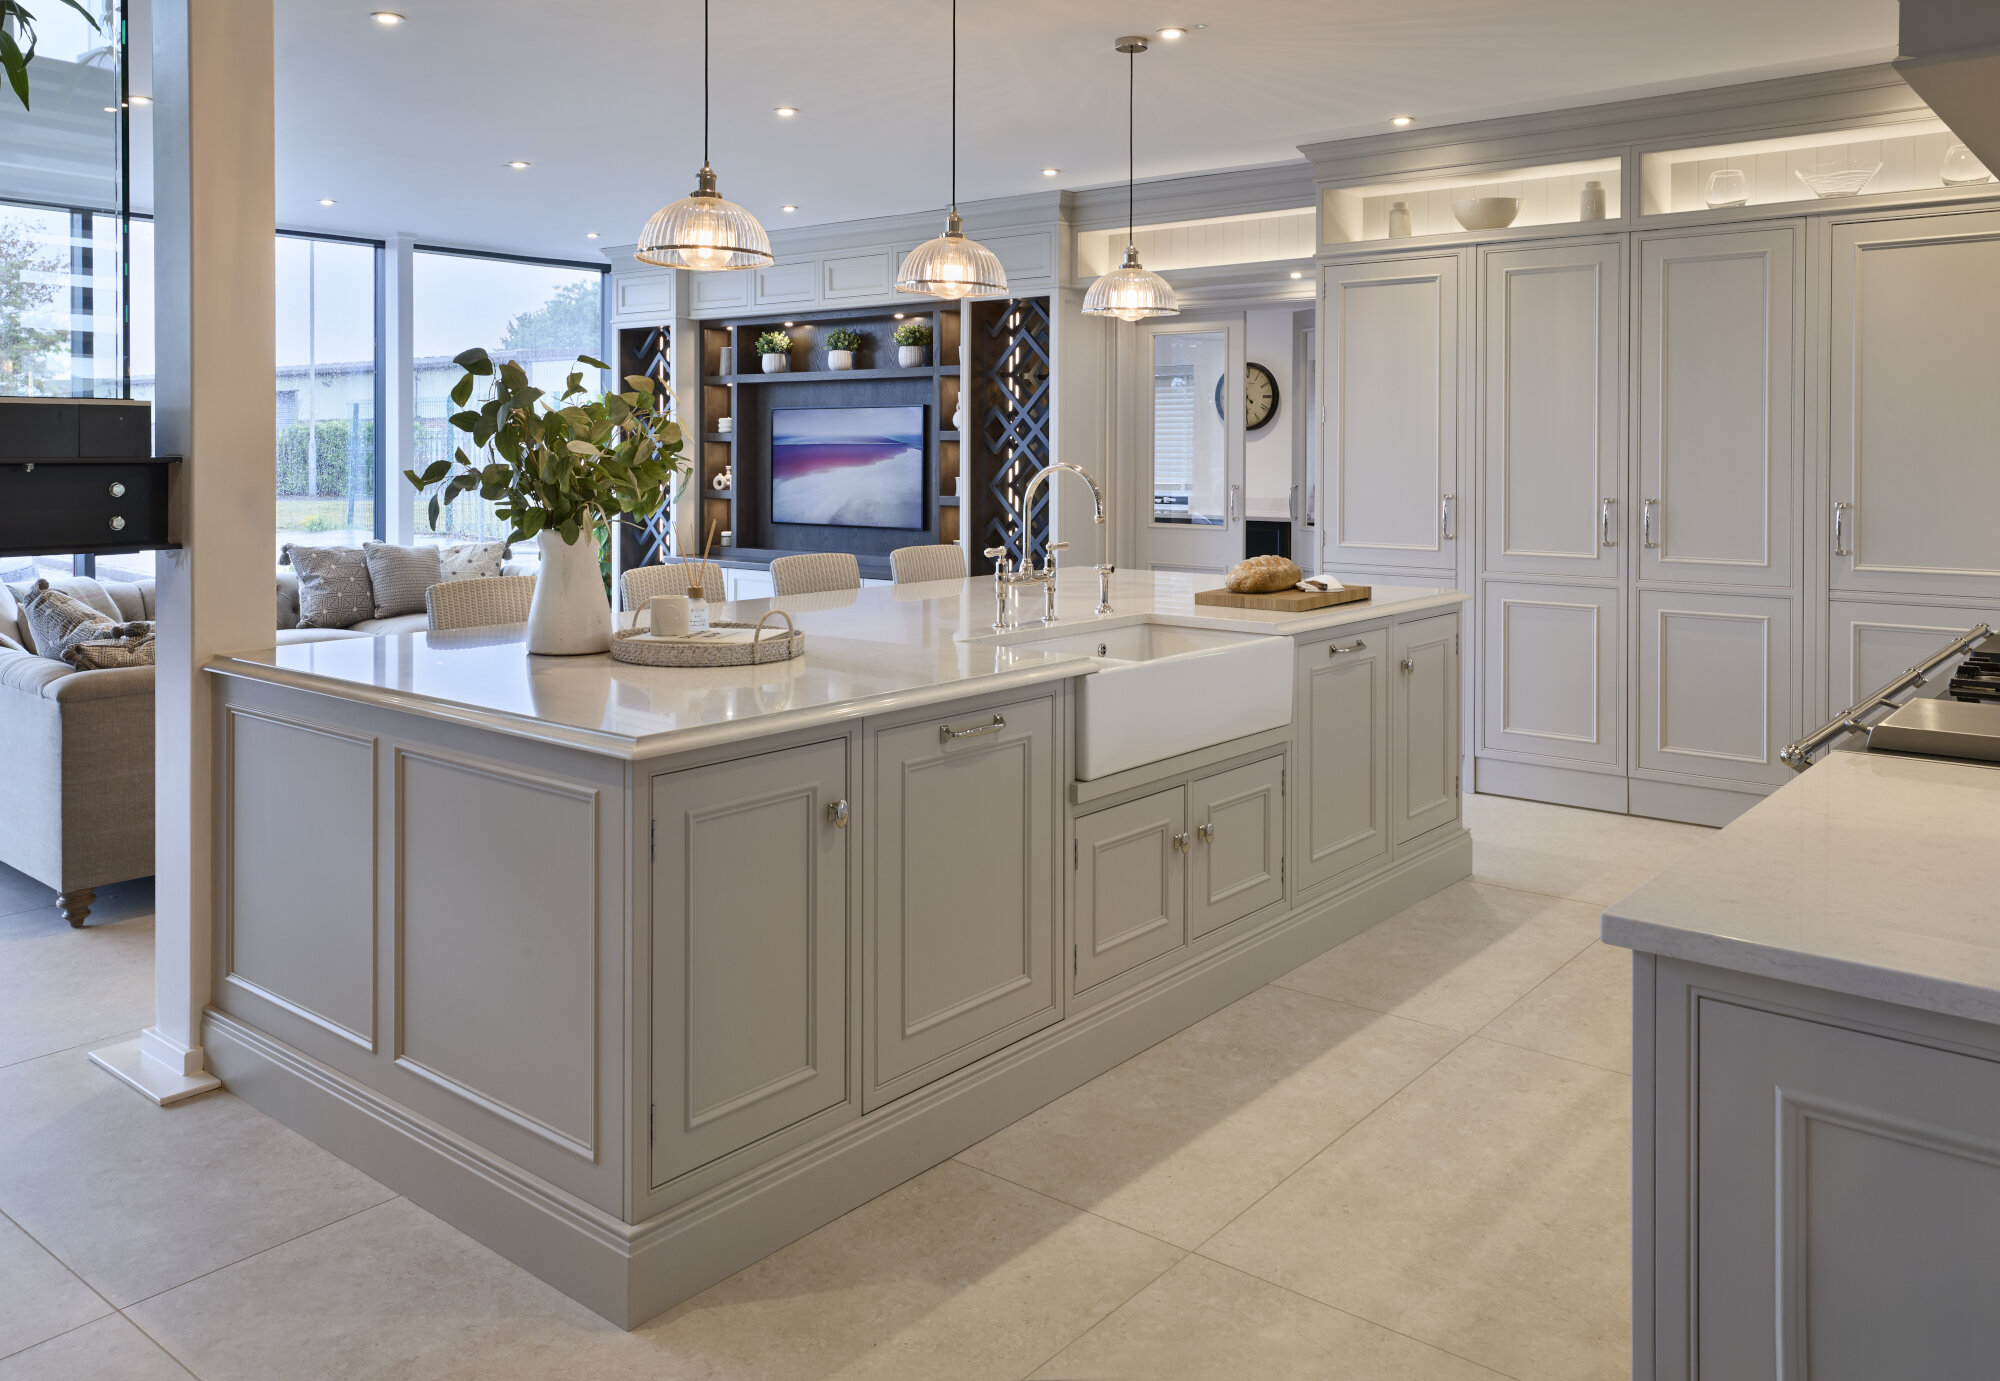 This Bespoke Kitchen Design is on display in our showroom near Heanor